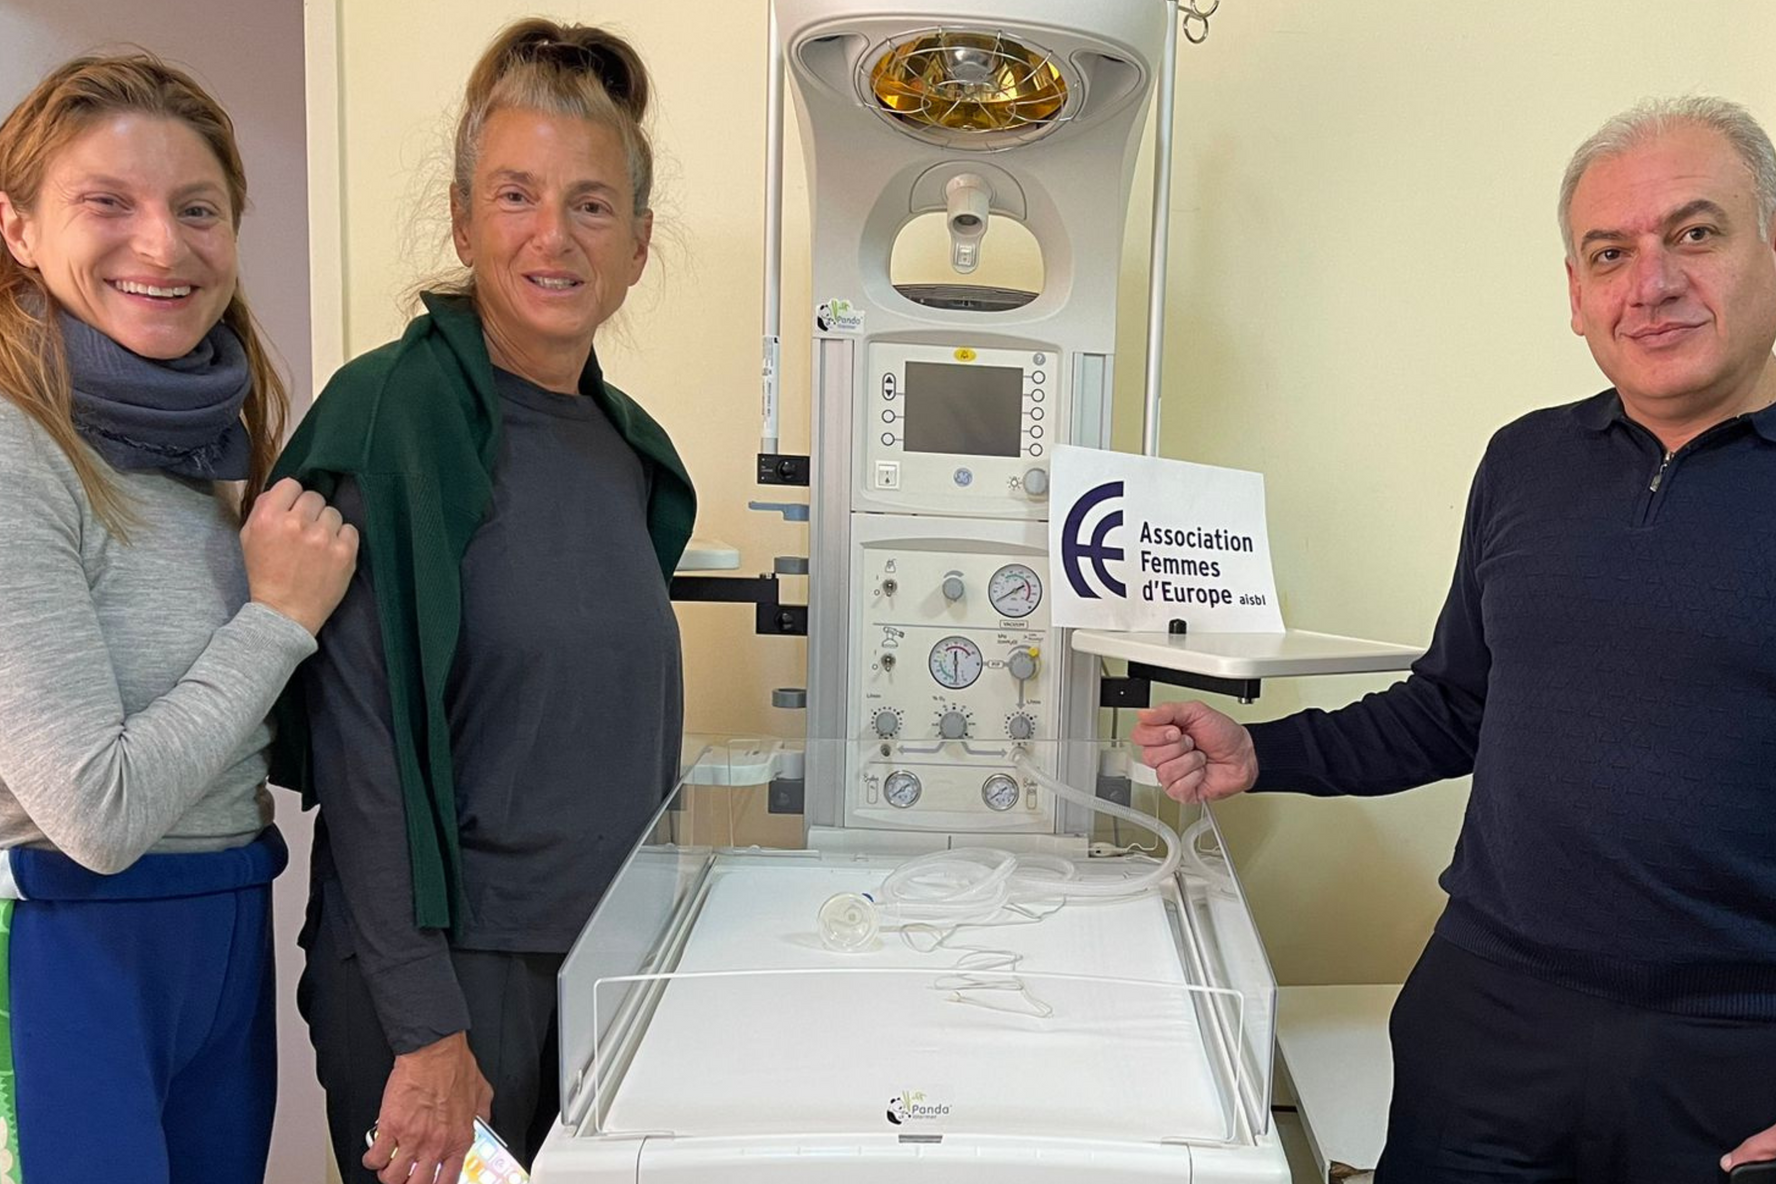 DONATION OF MEDICAL DEVICES TO HOSPITALS